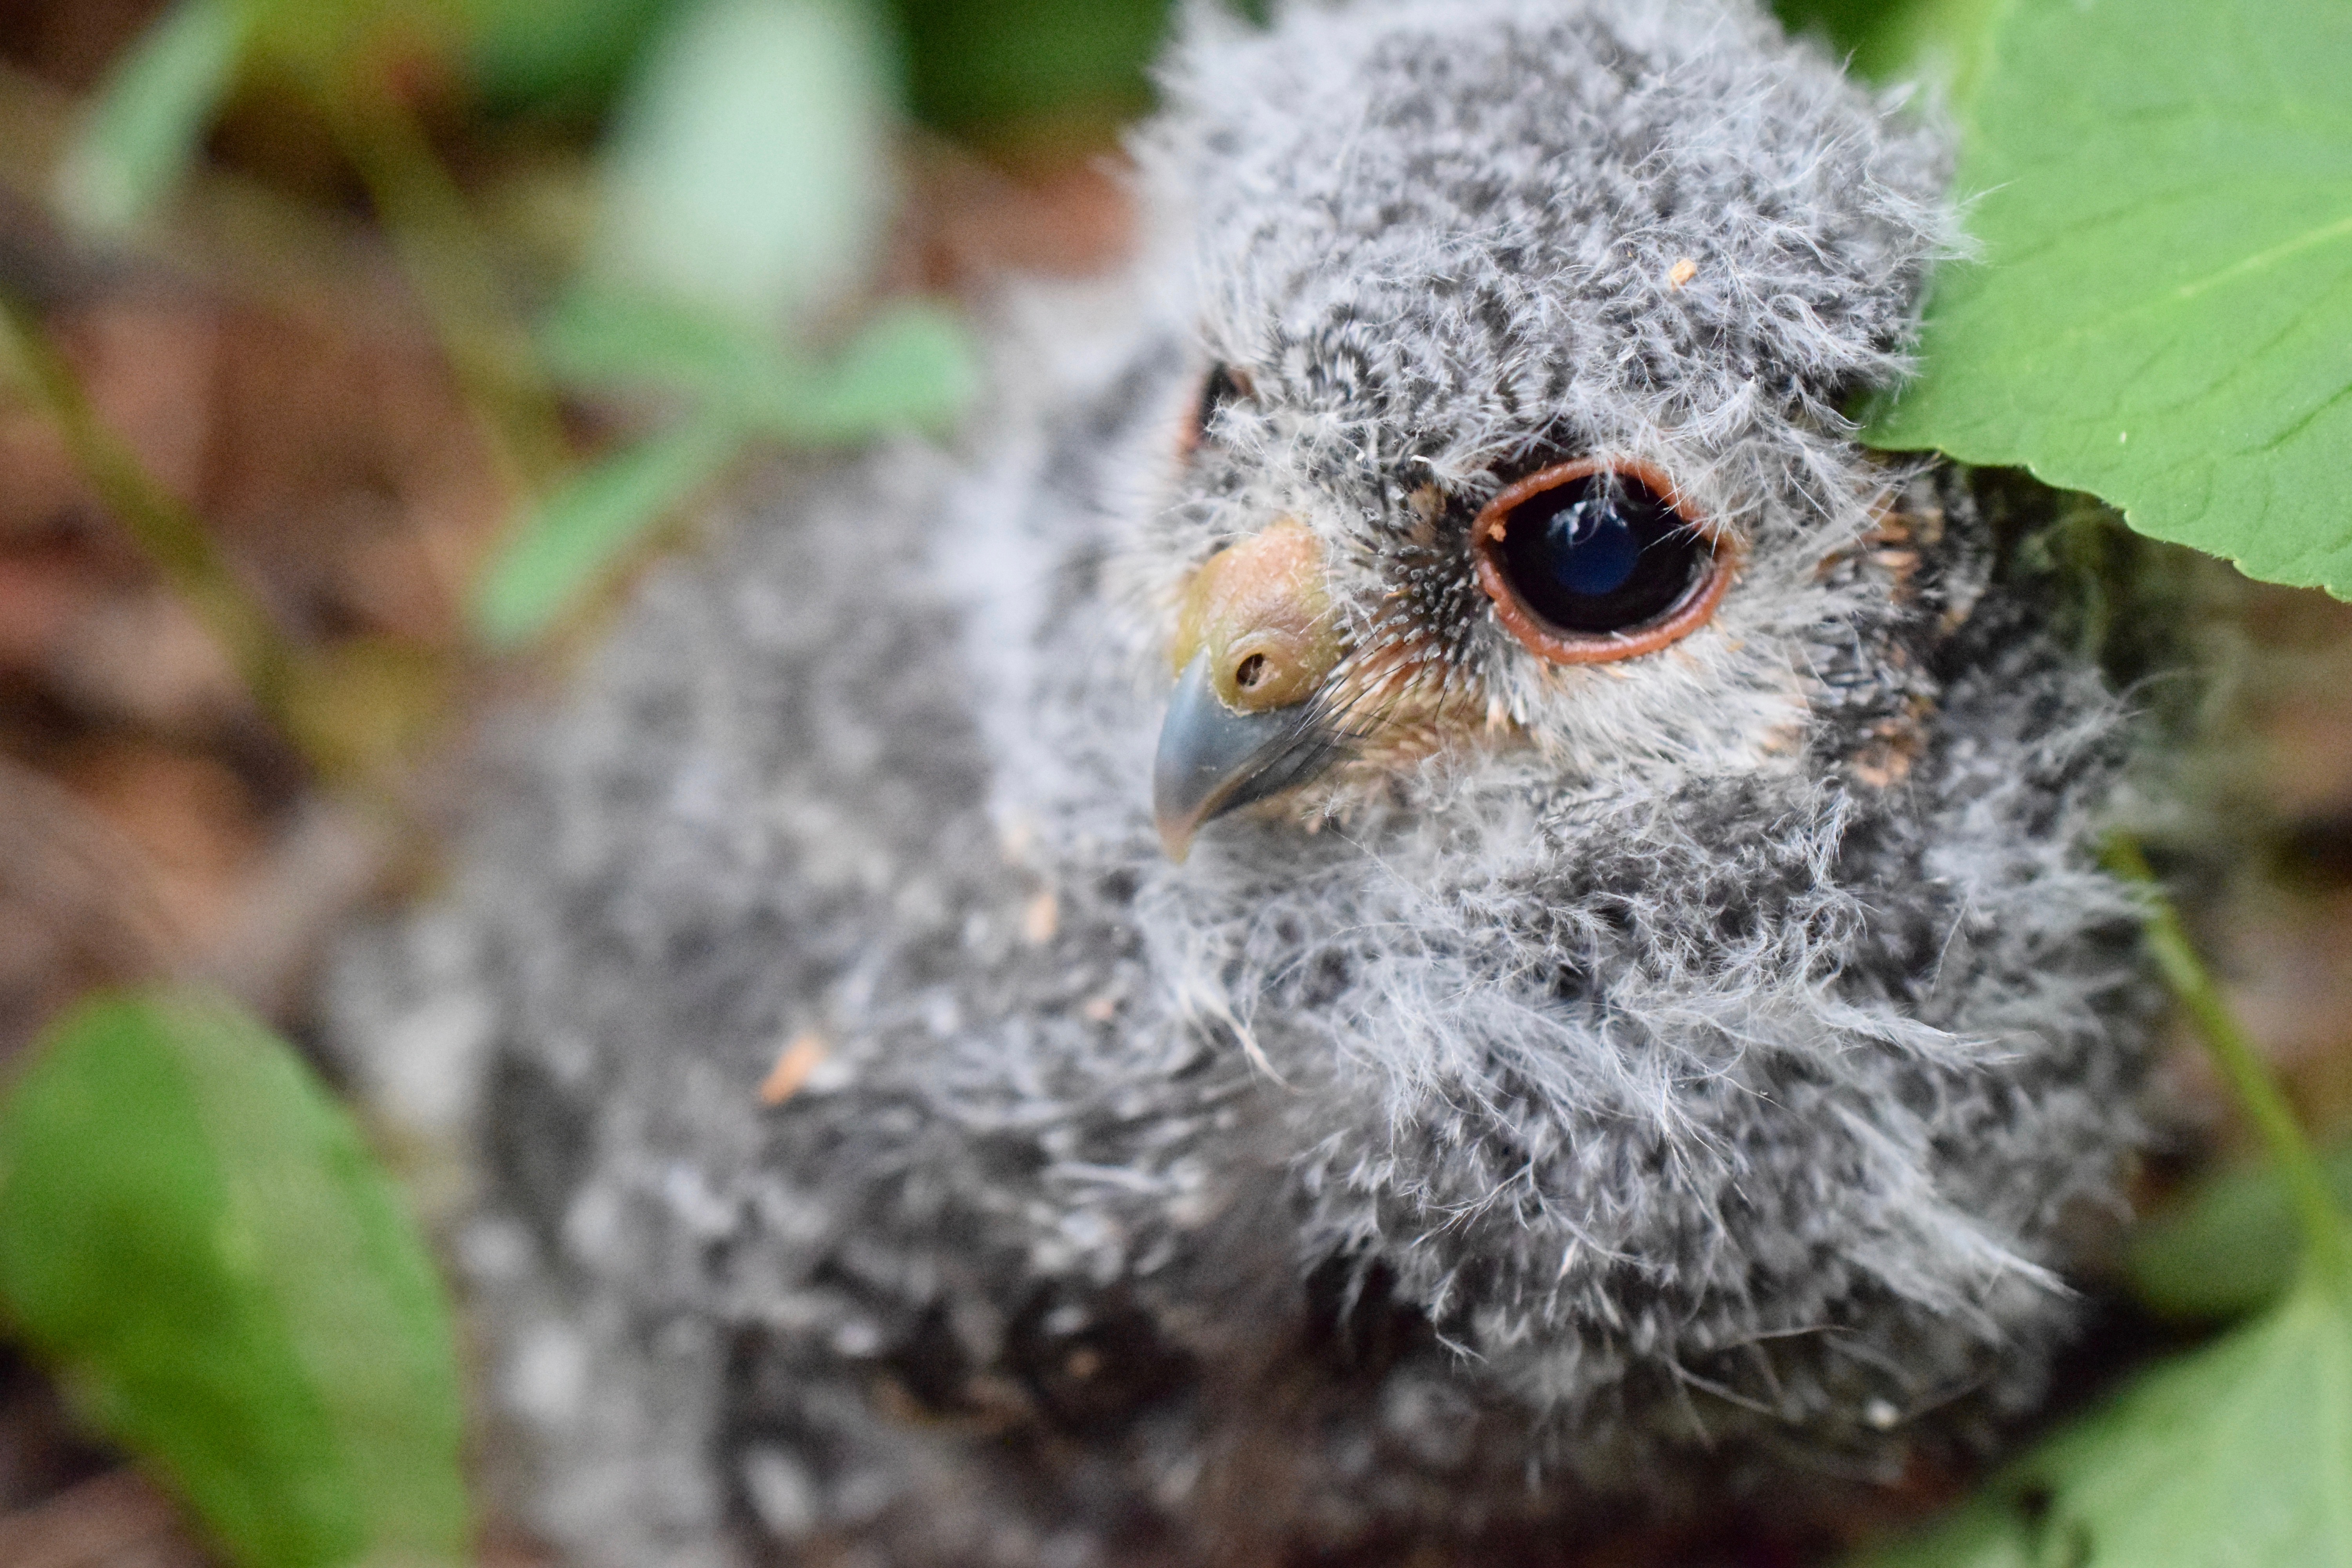 Flammulated owl nestling from Dr. Brian Linkhart's demography study. <span class="cc-gallery-credit">[Kate McGinn]</span>